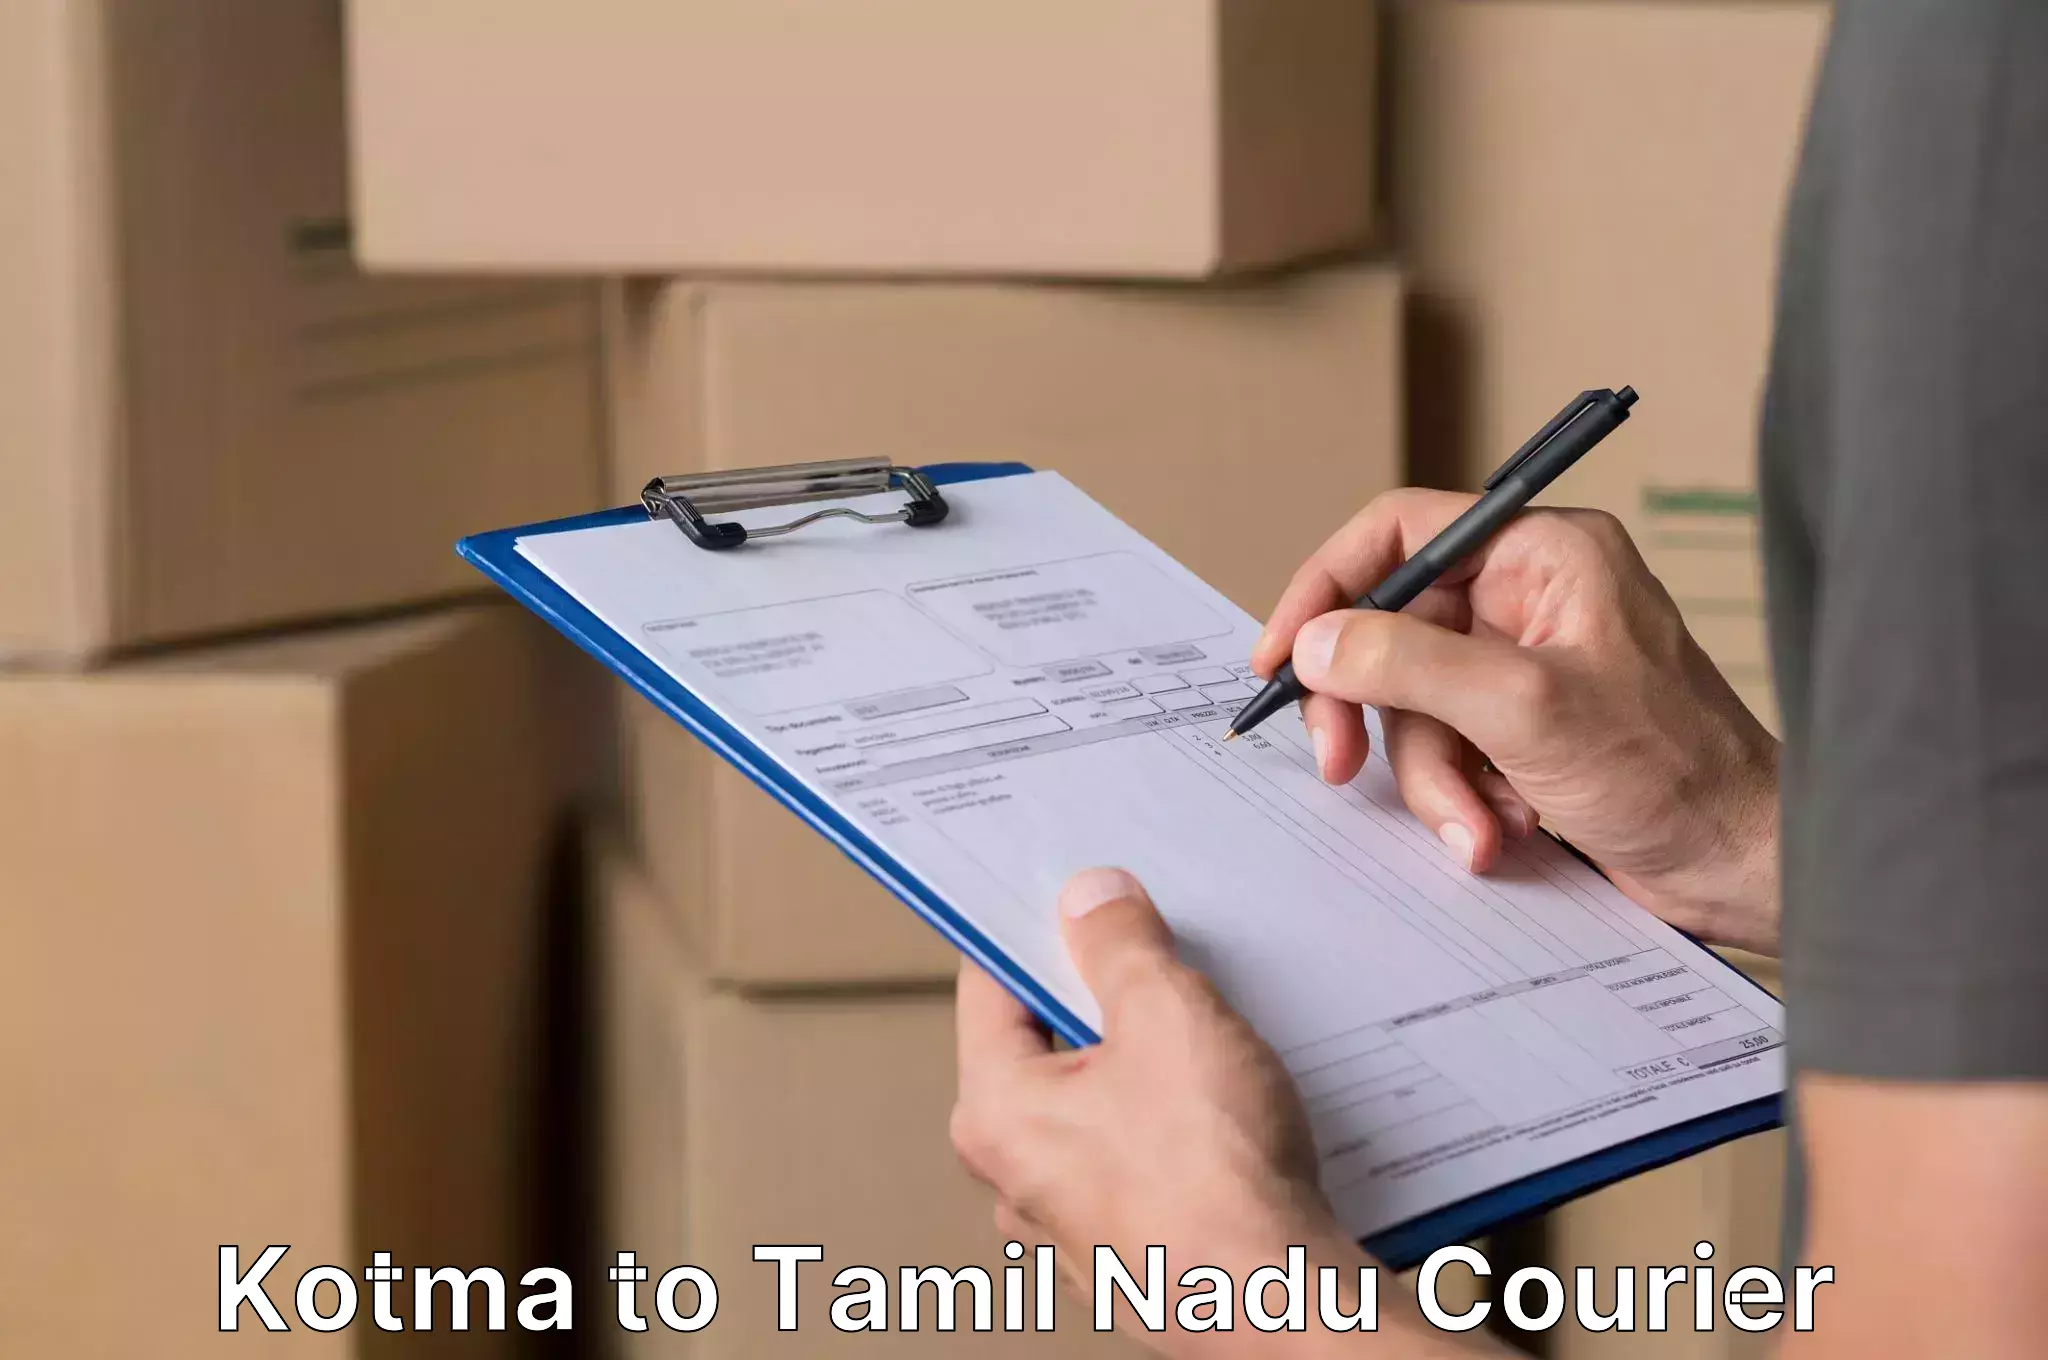 Trusted relocation experts Kotma to Tamil Nadu